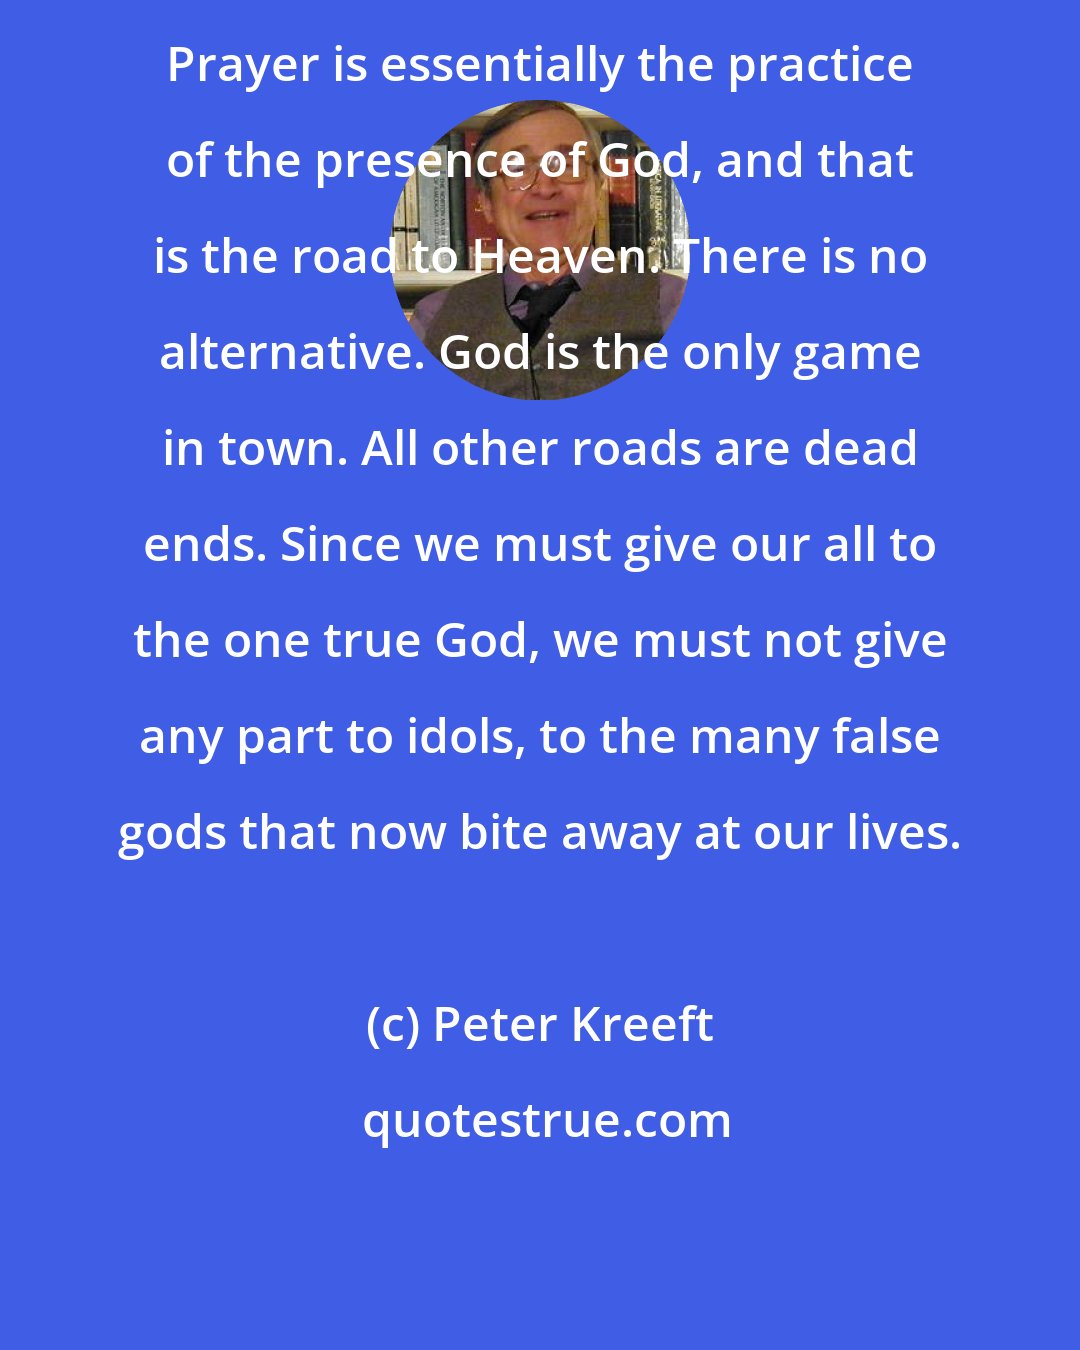 Peter Kreeft: Prayer is essentially the practice of the presence of God, and that is the road to Heaven. There is no alternative. God is the only game in town. All other roads are dead ends. Since we must give our all to the one true God, we must not give any part to idols, to the many false gods that now bite away at our lives.